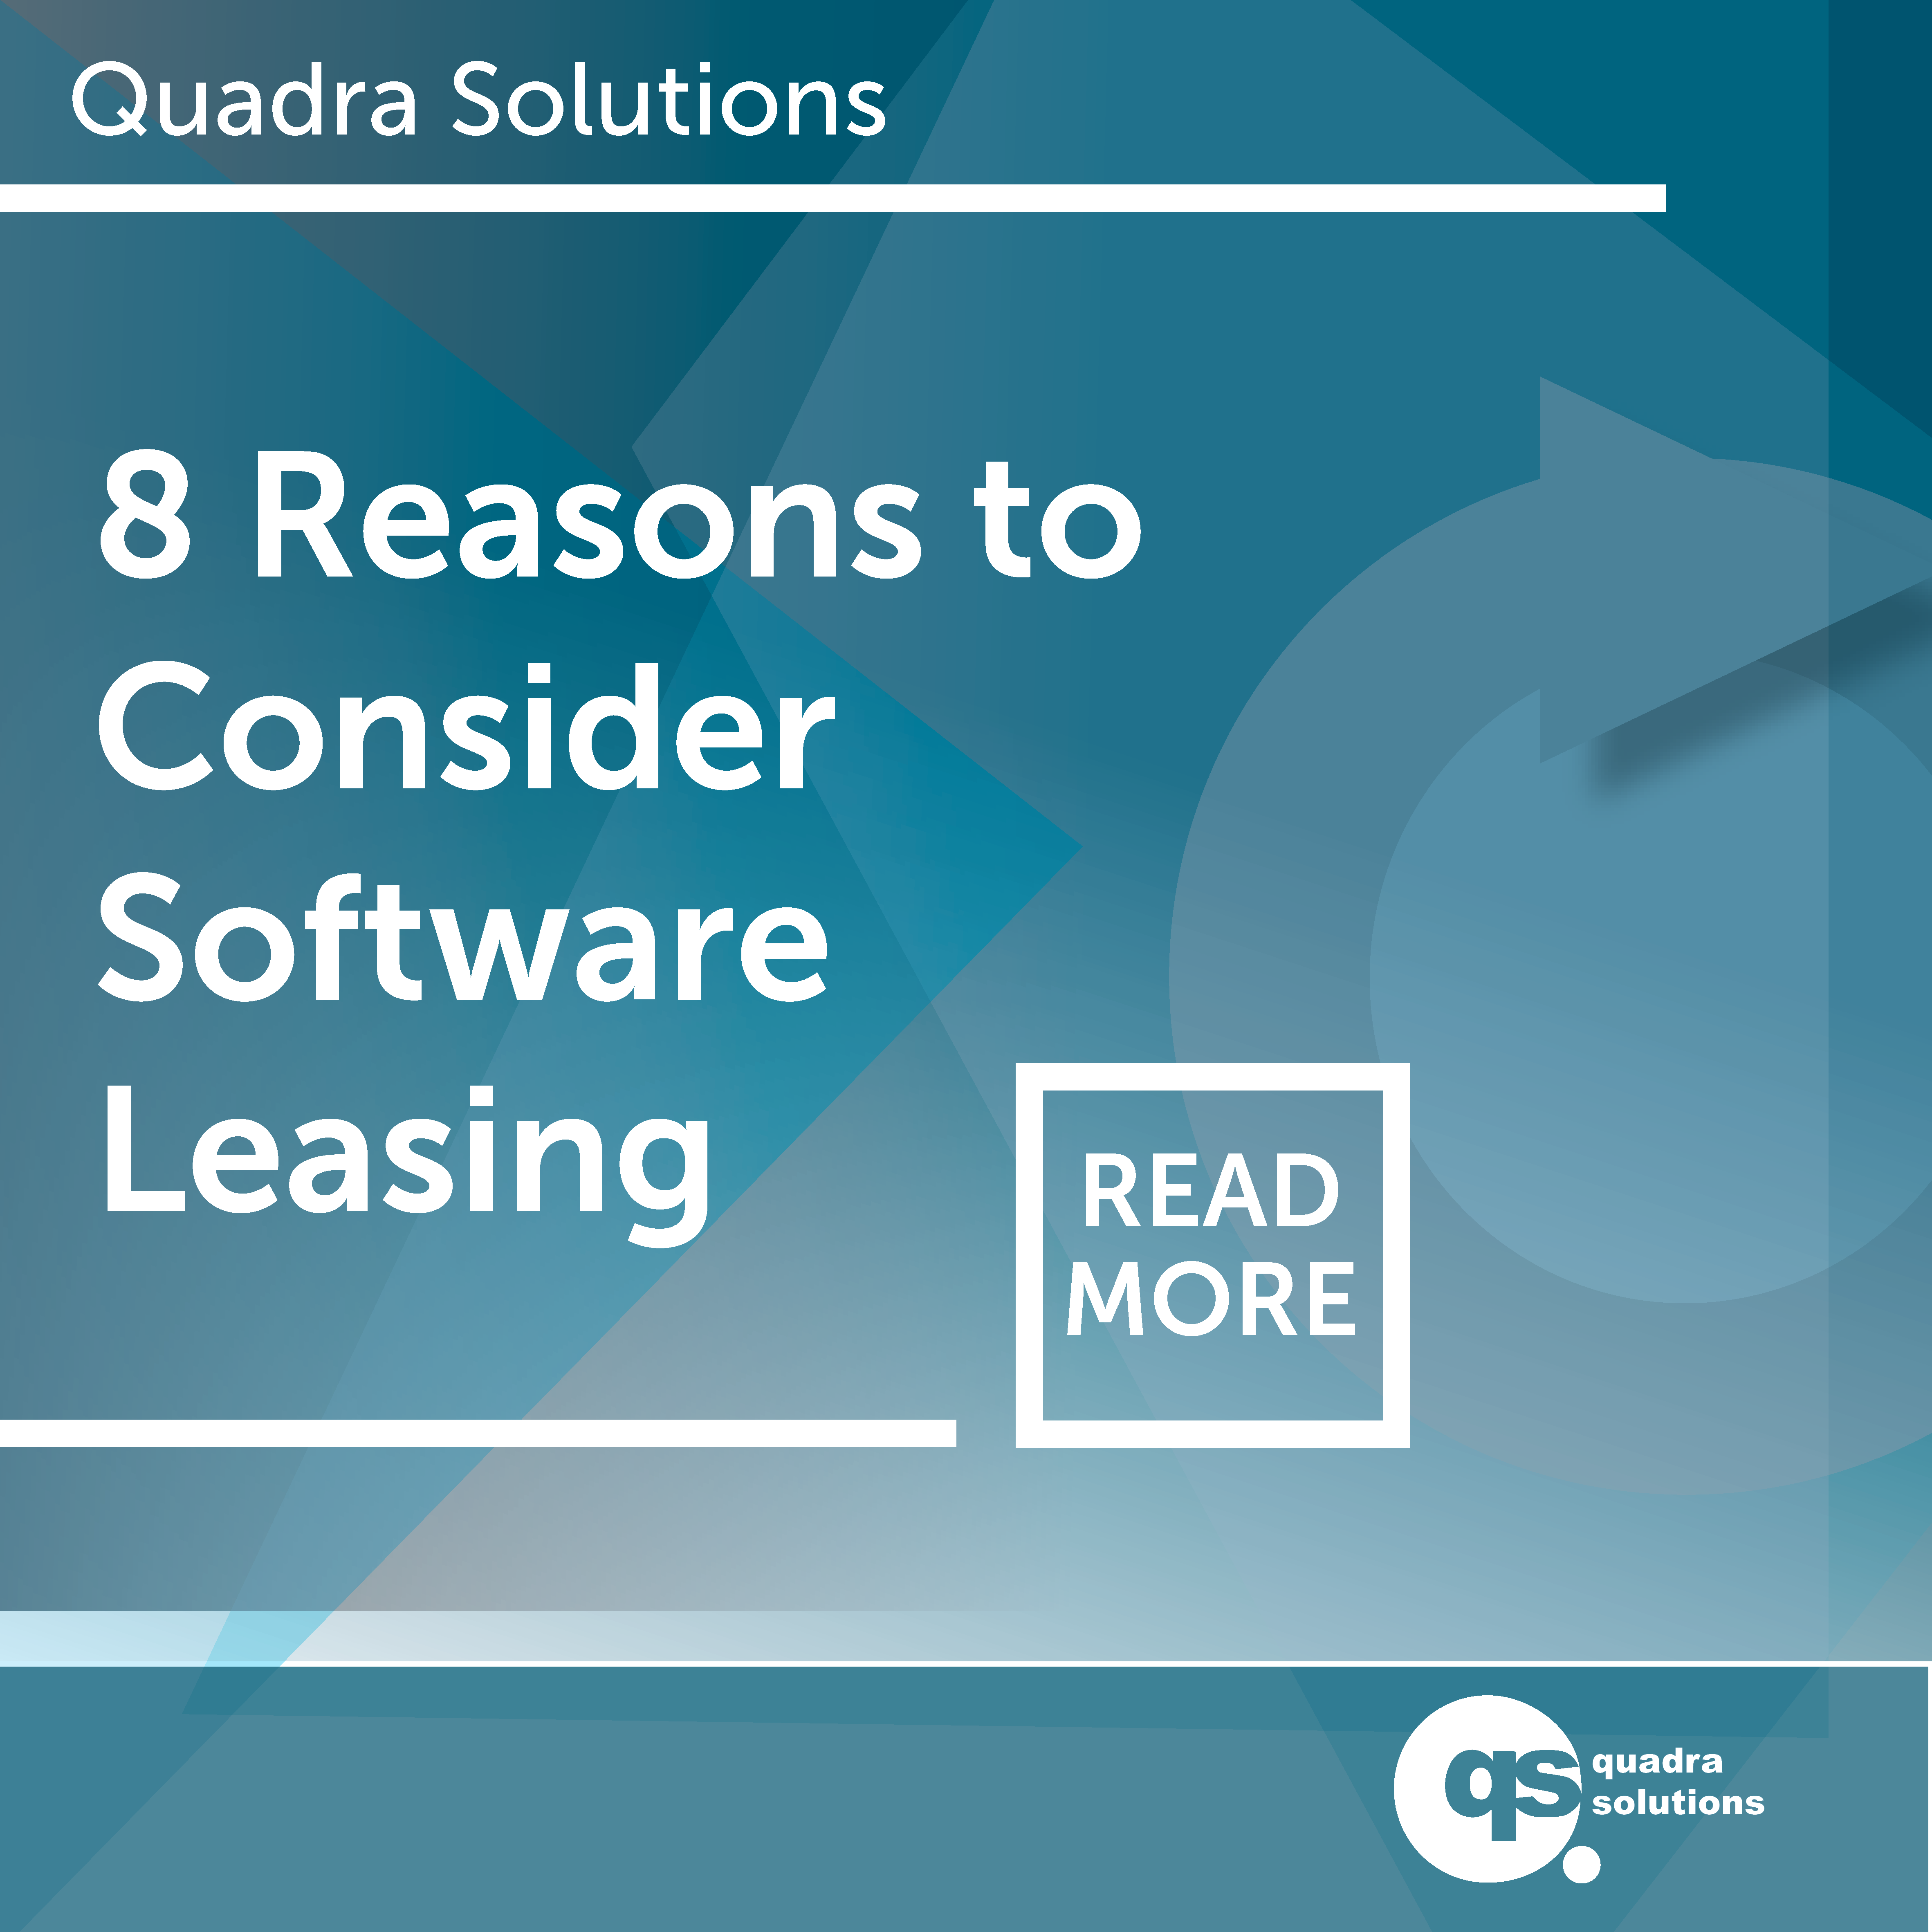 8 Reasons to Consider Software Leasing